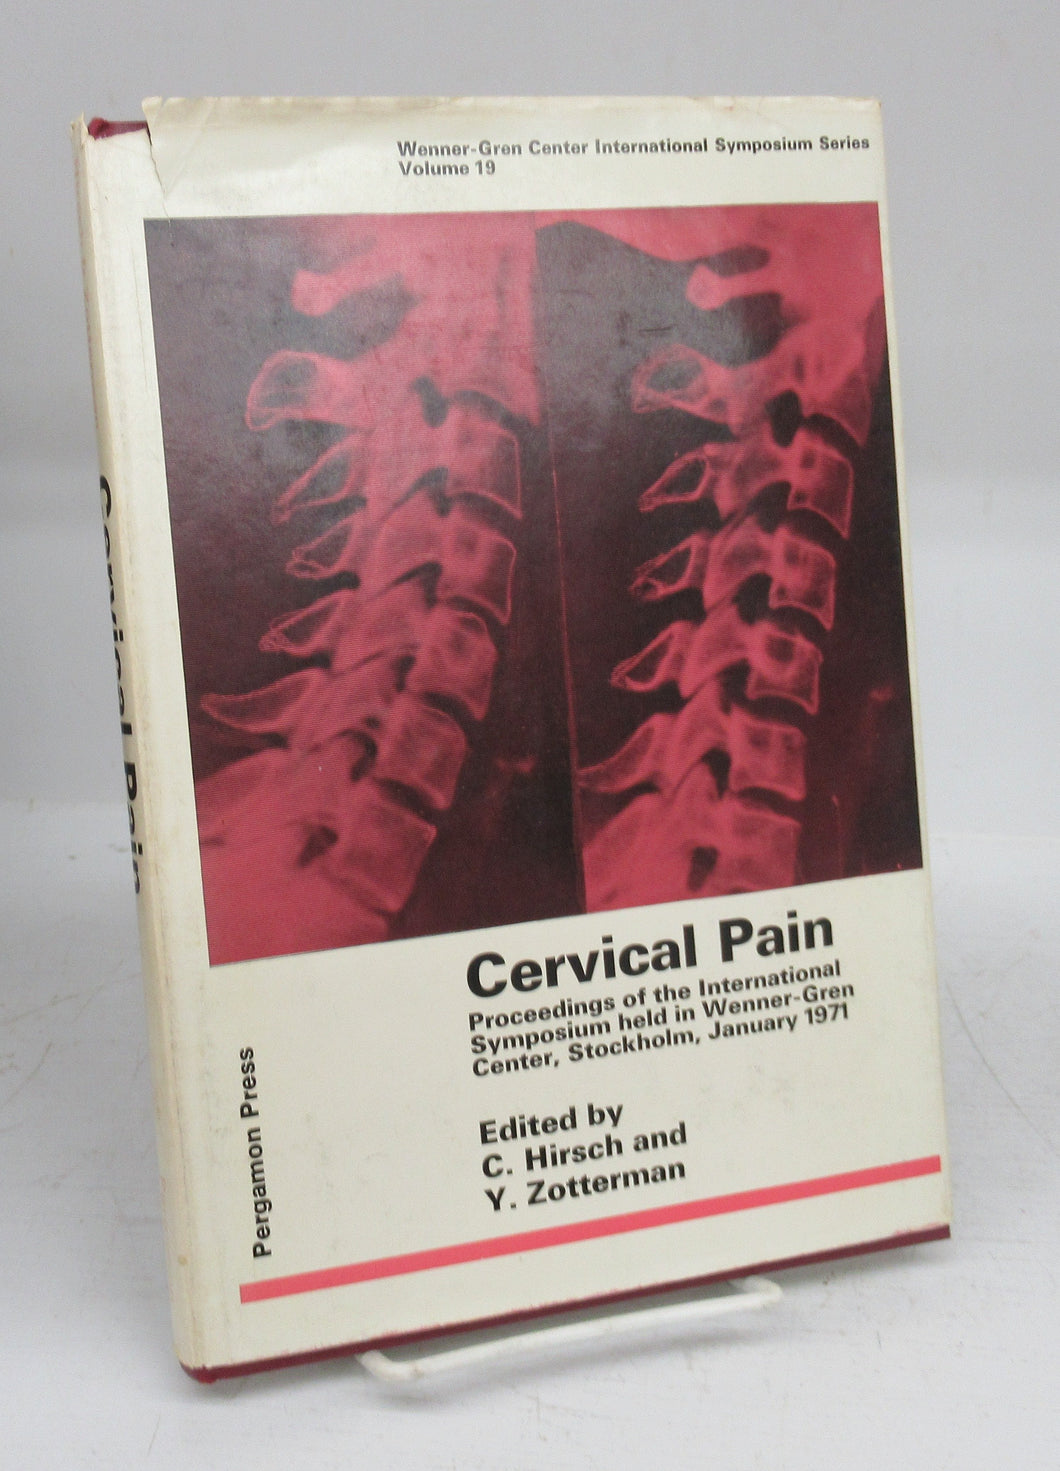 Cervical Pain: Proceedings of the International Symposium held in Wenner-Gren Center, Stockholm, January 1971